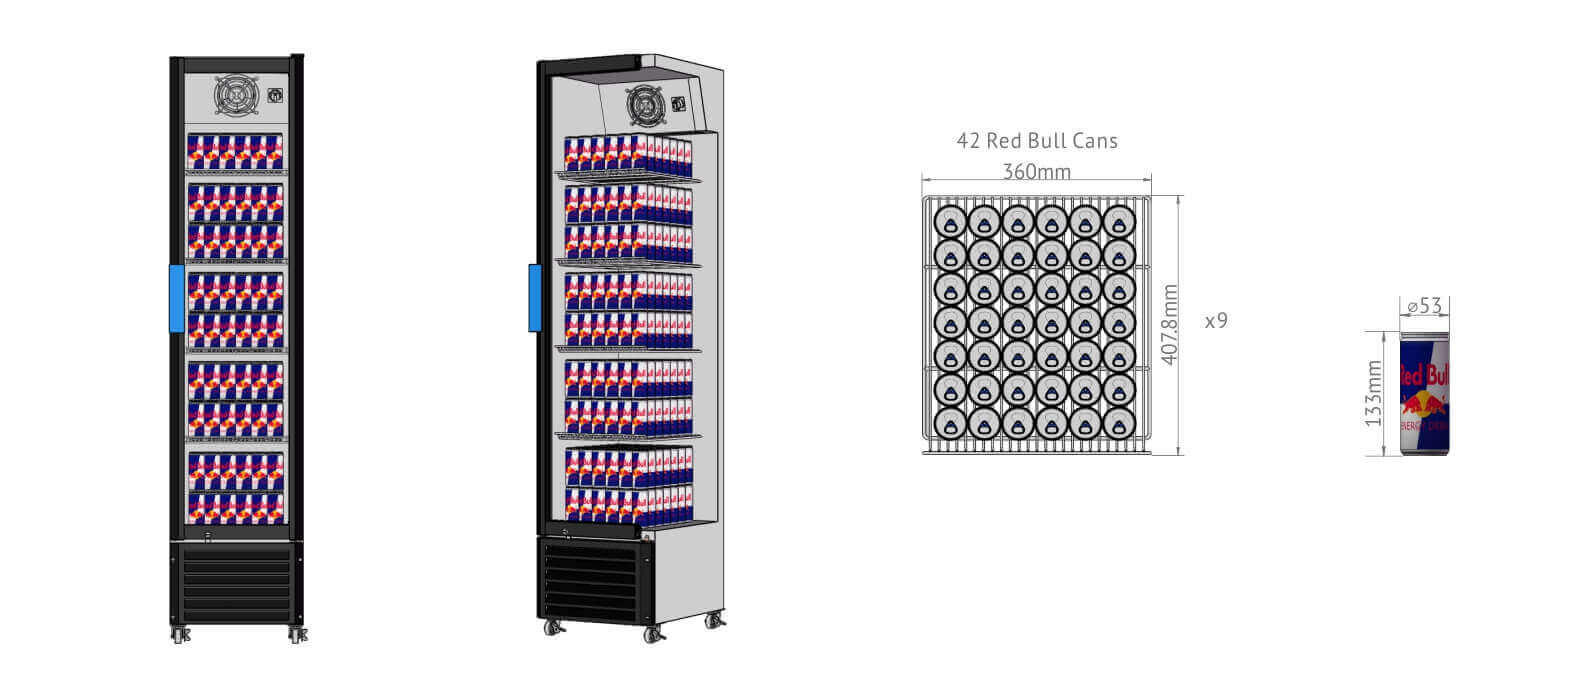 Procool Narrow Drinks Fridge CSL-260B Pack-out_Red Bull 250ml Cans